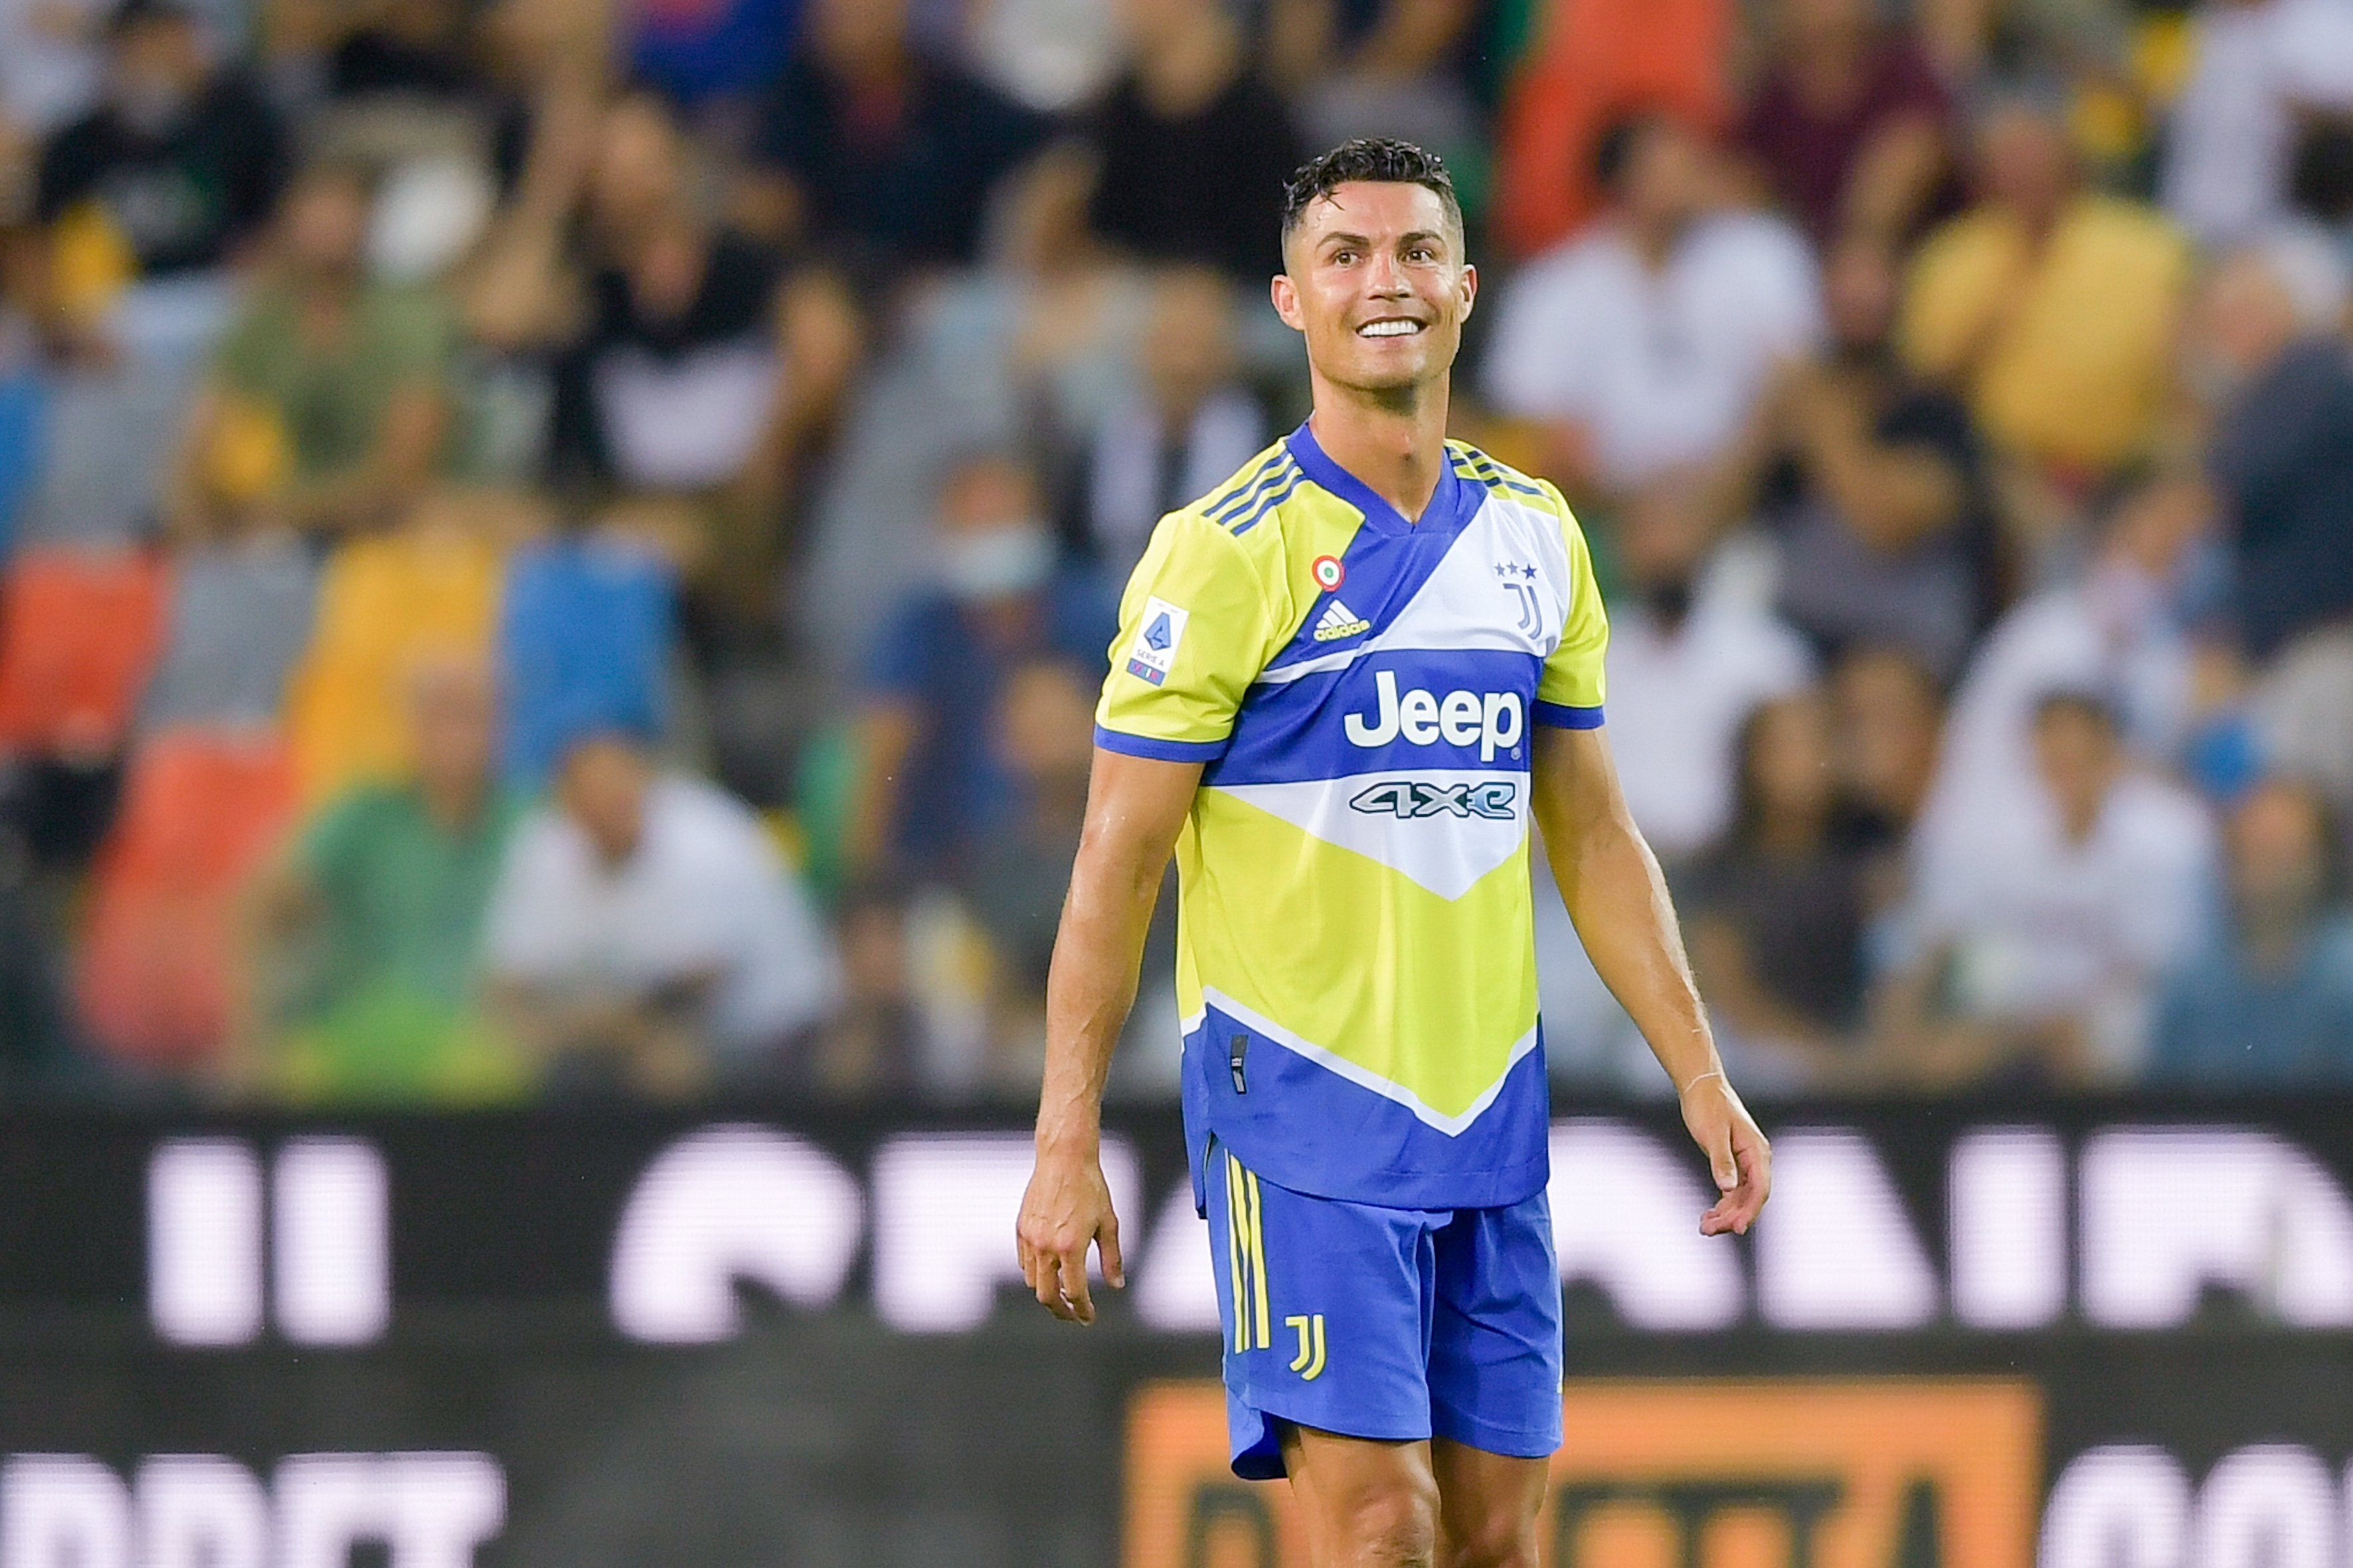 Report: Cristiano Ronaldo 'Definitely' Wants to Leave Juventus, Asks Club to be Sold